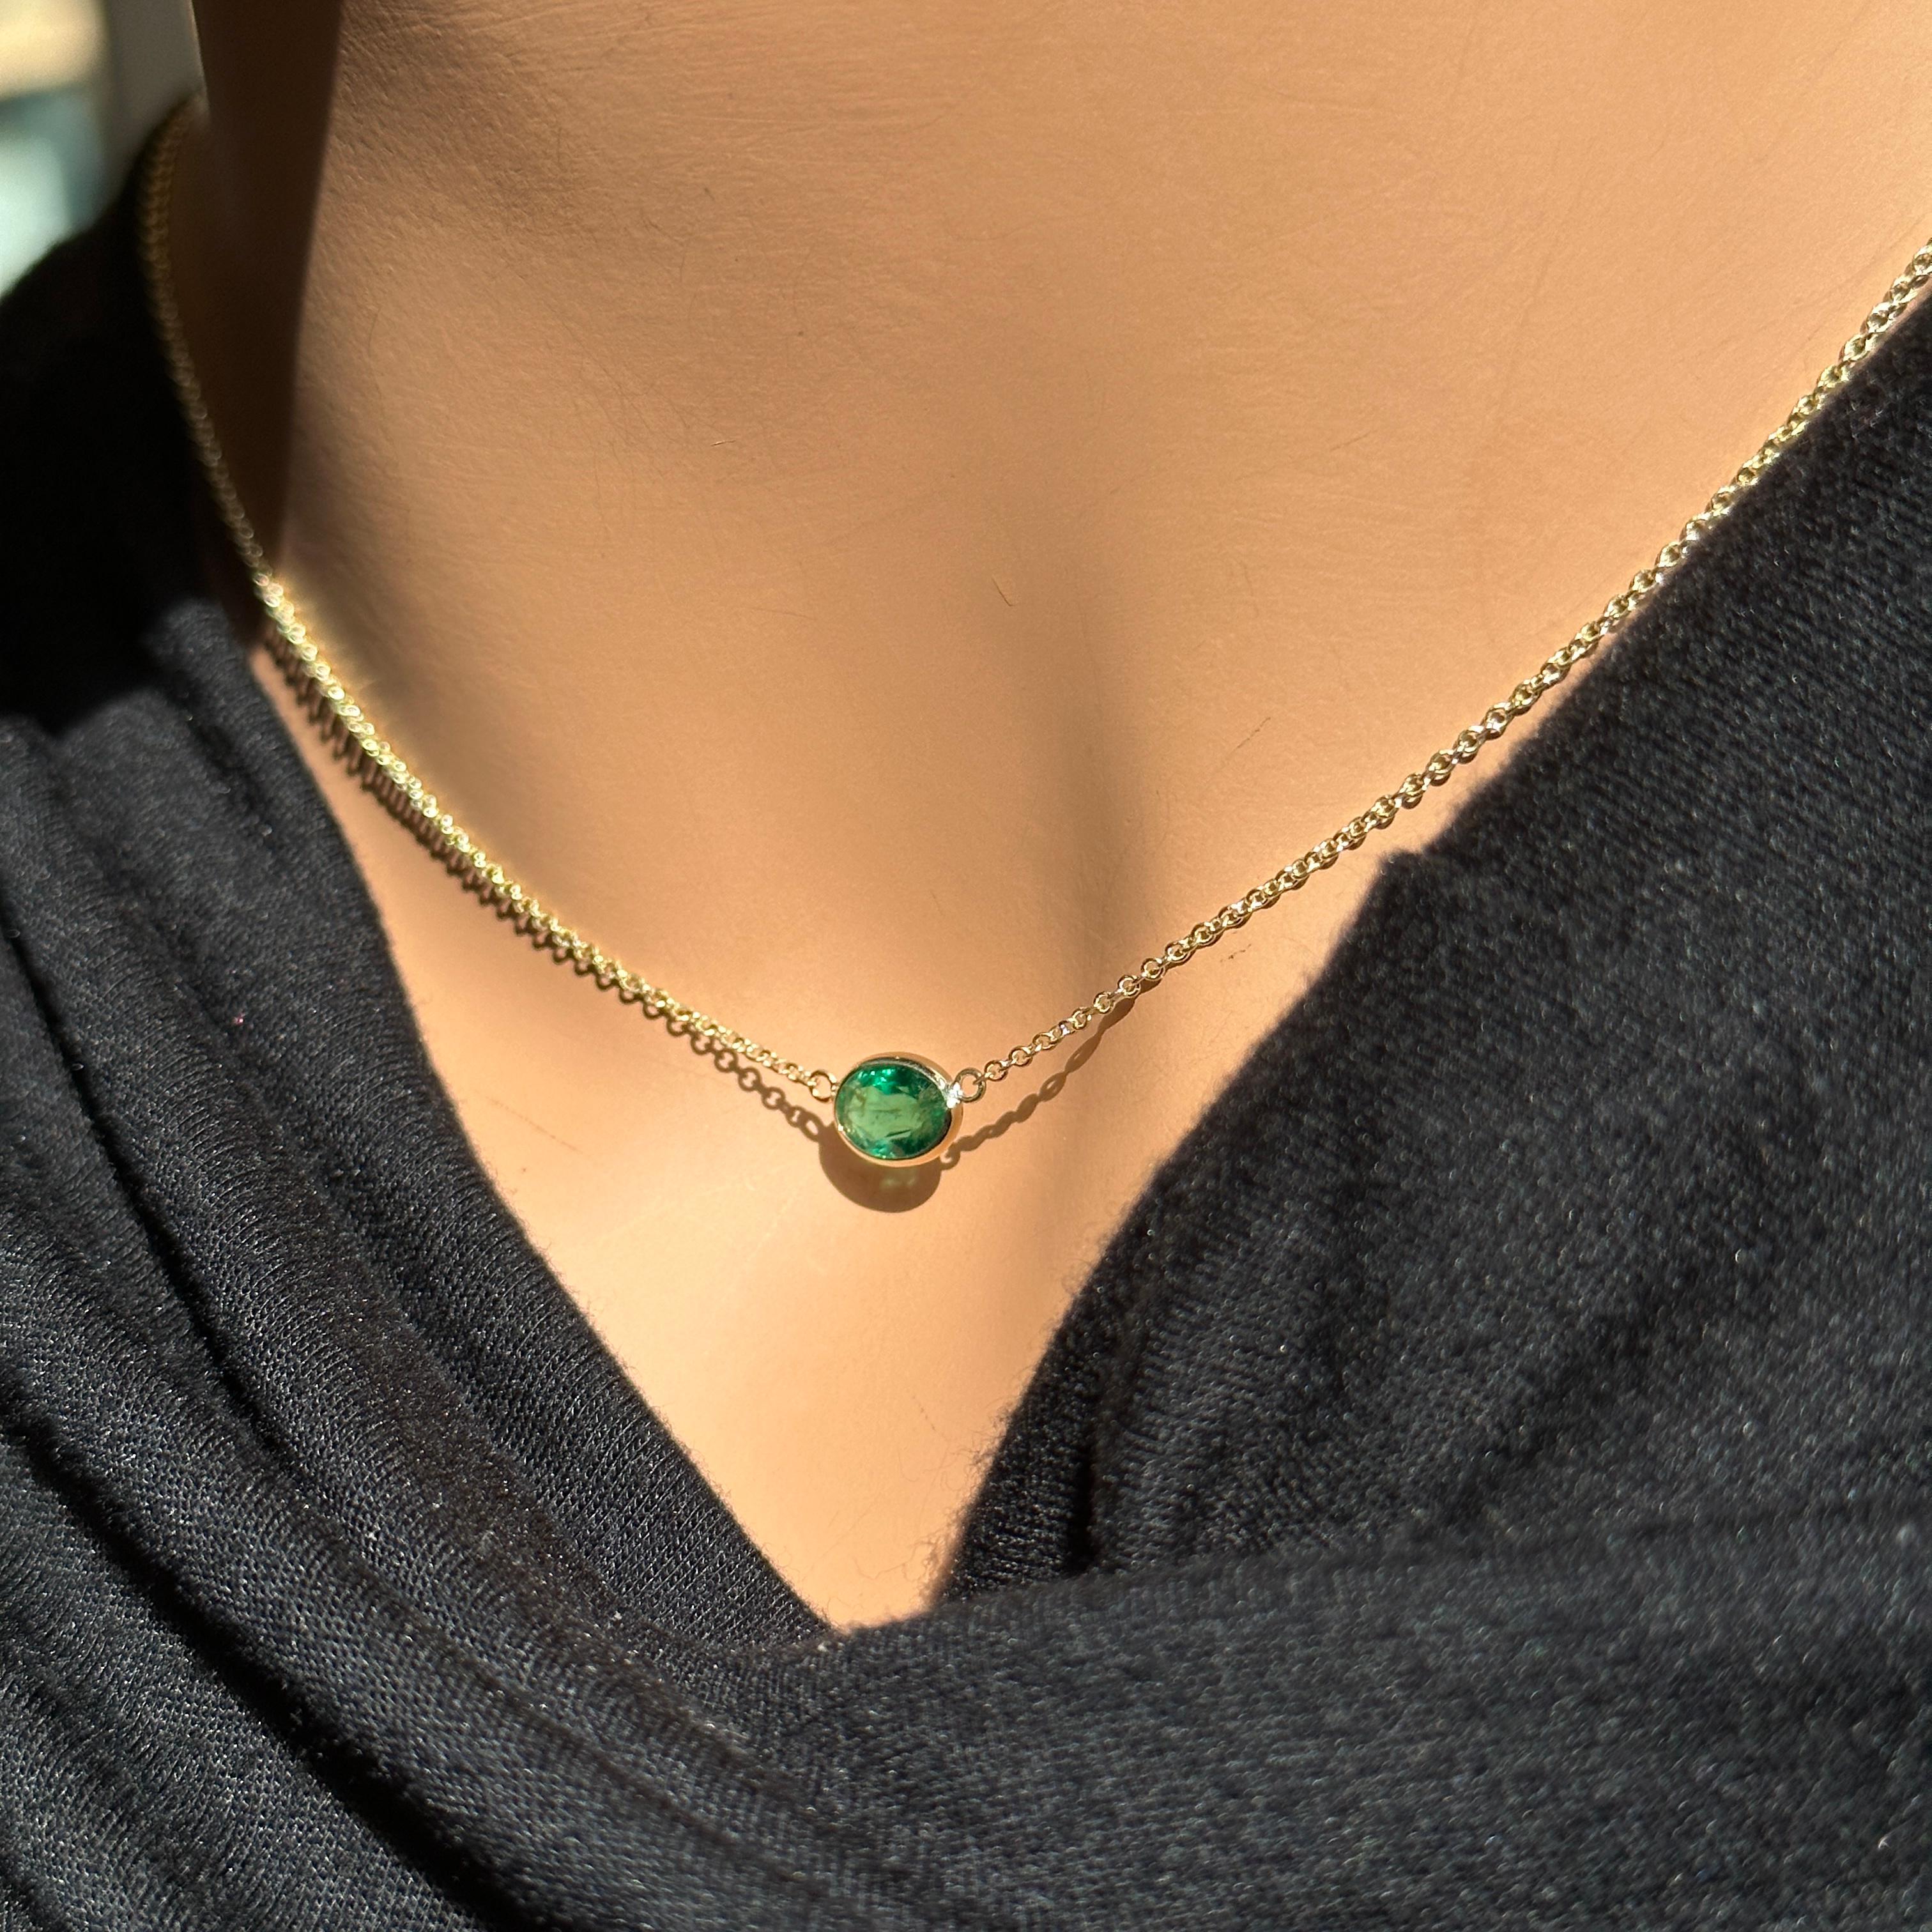 A fashion necklace crafted in 14k yellow gold with a main stone of an oval-cut emerald weighing 0.97 carats would be a beautiful and elegant choice. Emeralds are known for their rich green color and timeless appeal, and the oval cut adds a classic